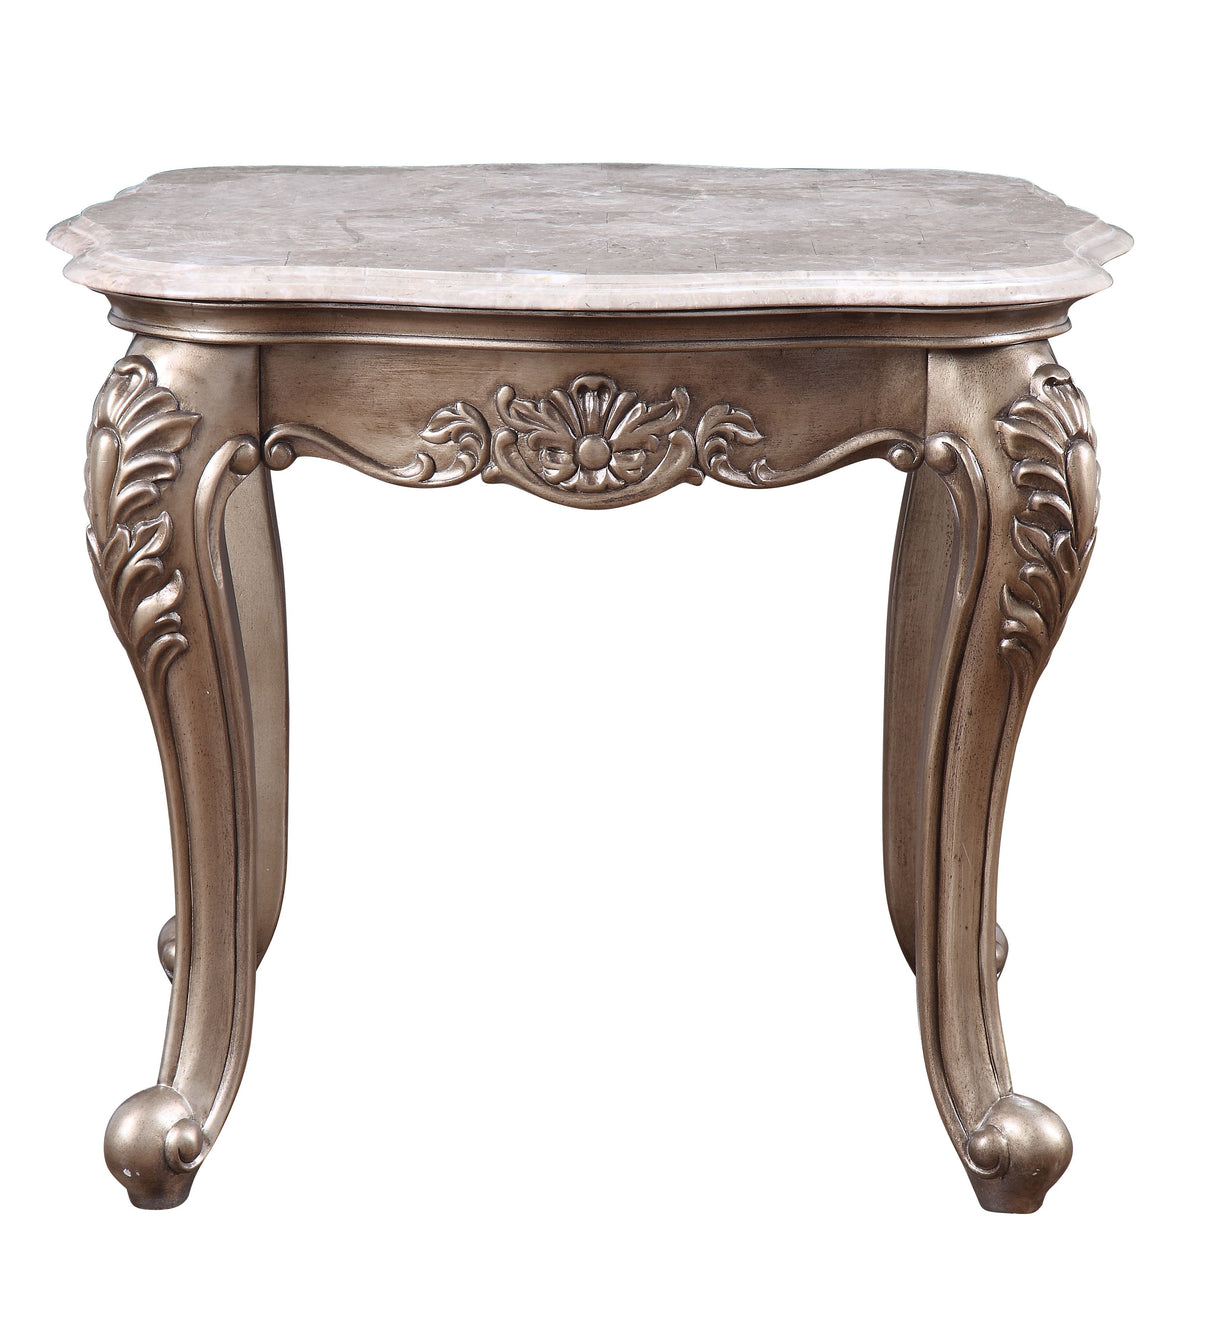 Acme - Jayceon End Table 84867 Marble Top & Champagne Finish